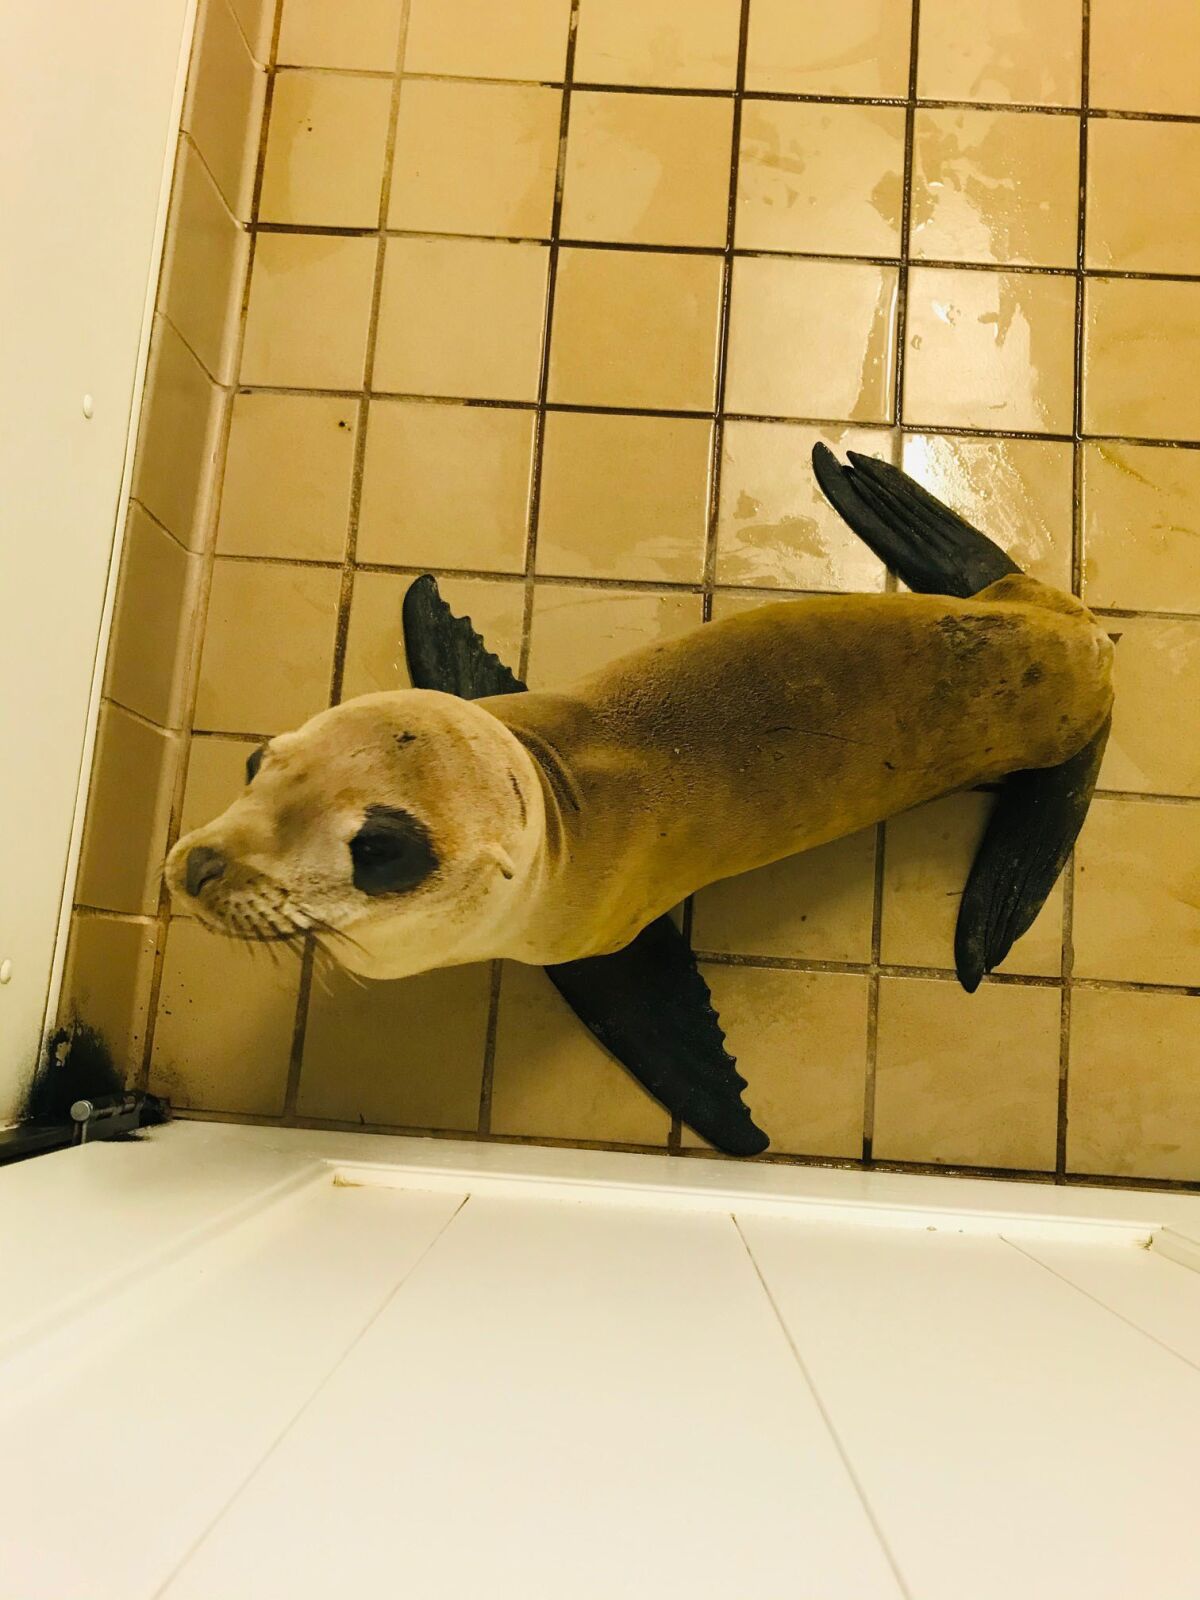 Miss Haggis, a California sea lion after rescue. She has a bad eye and fishing hook in her esophagus.